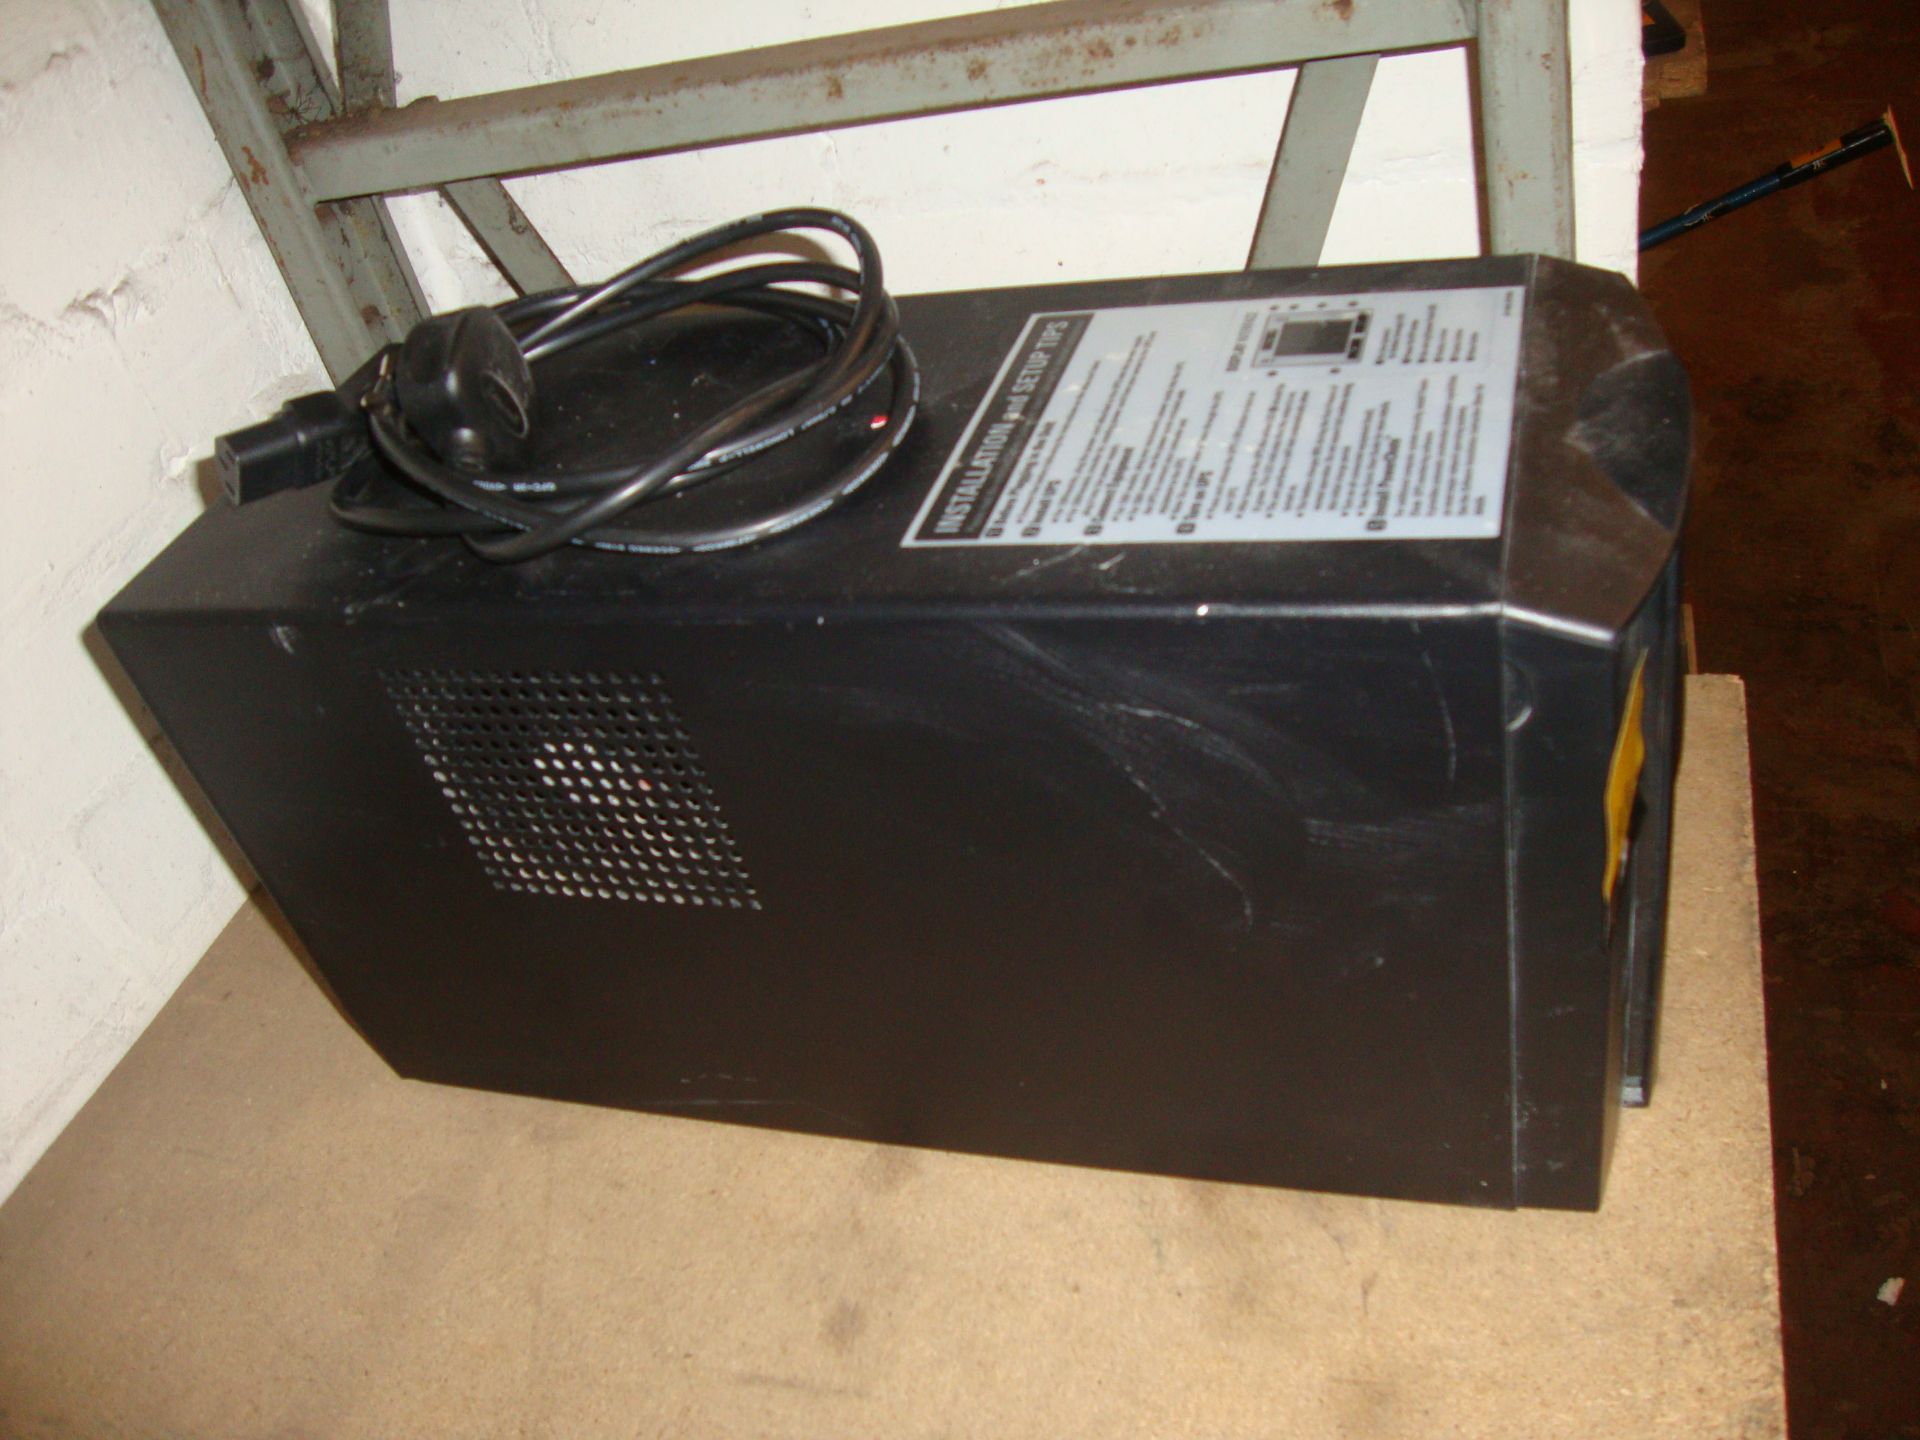 APC Smart-UPS model C1500 battery back-up with digital interface - Image 3 of 3